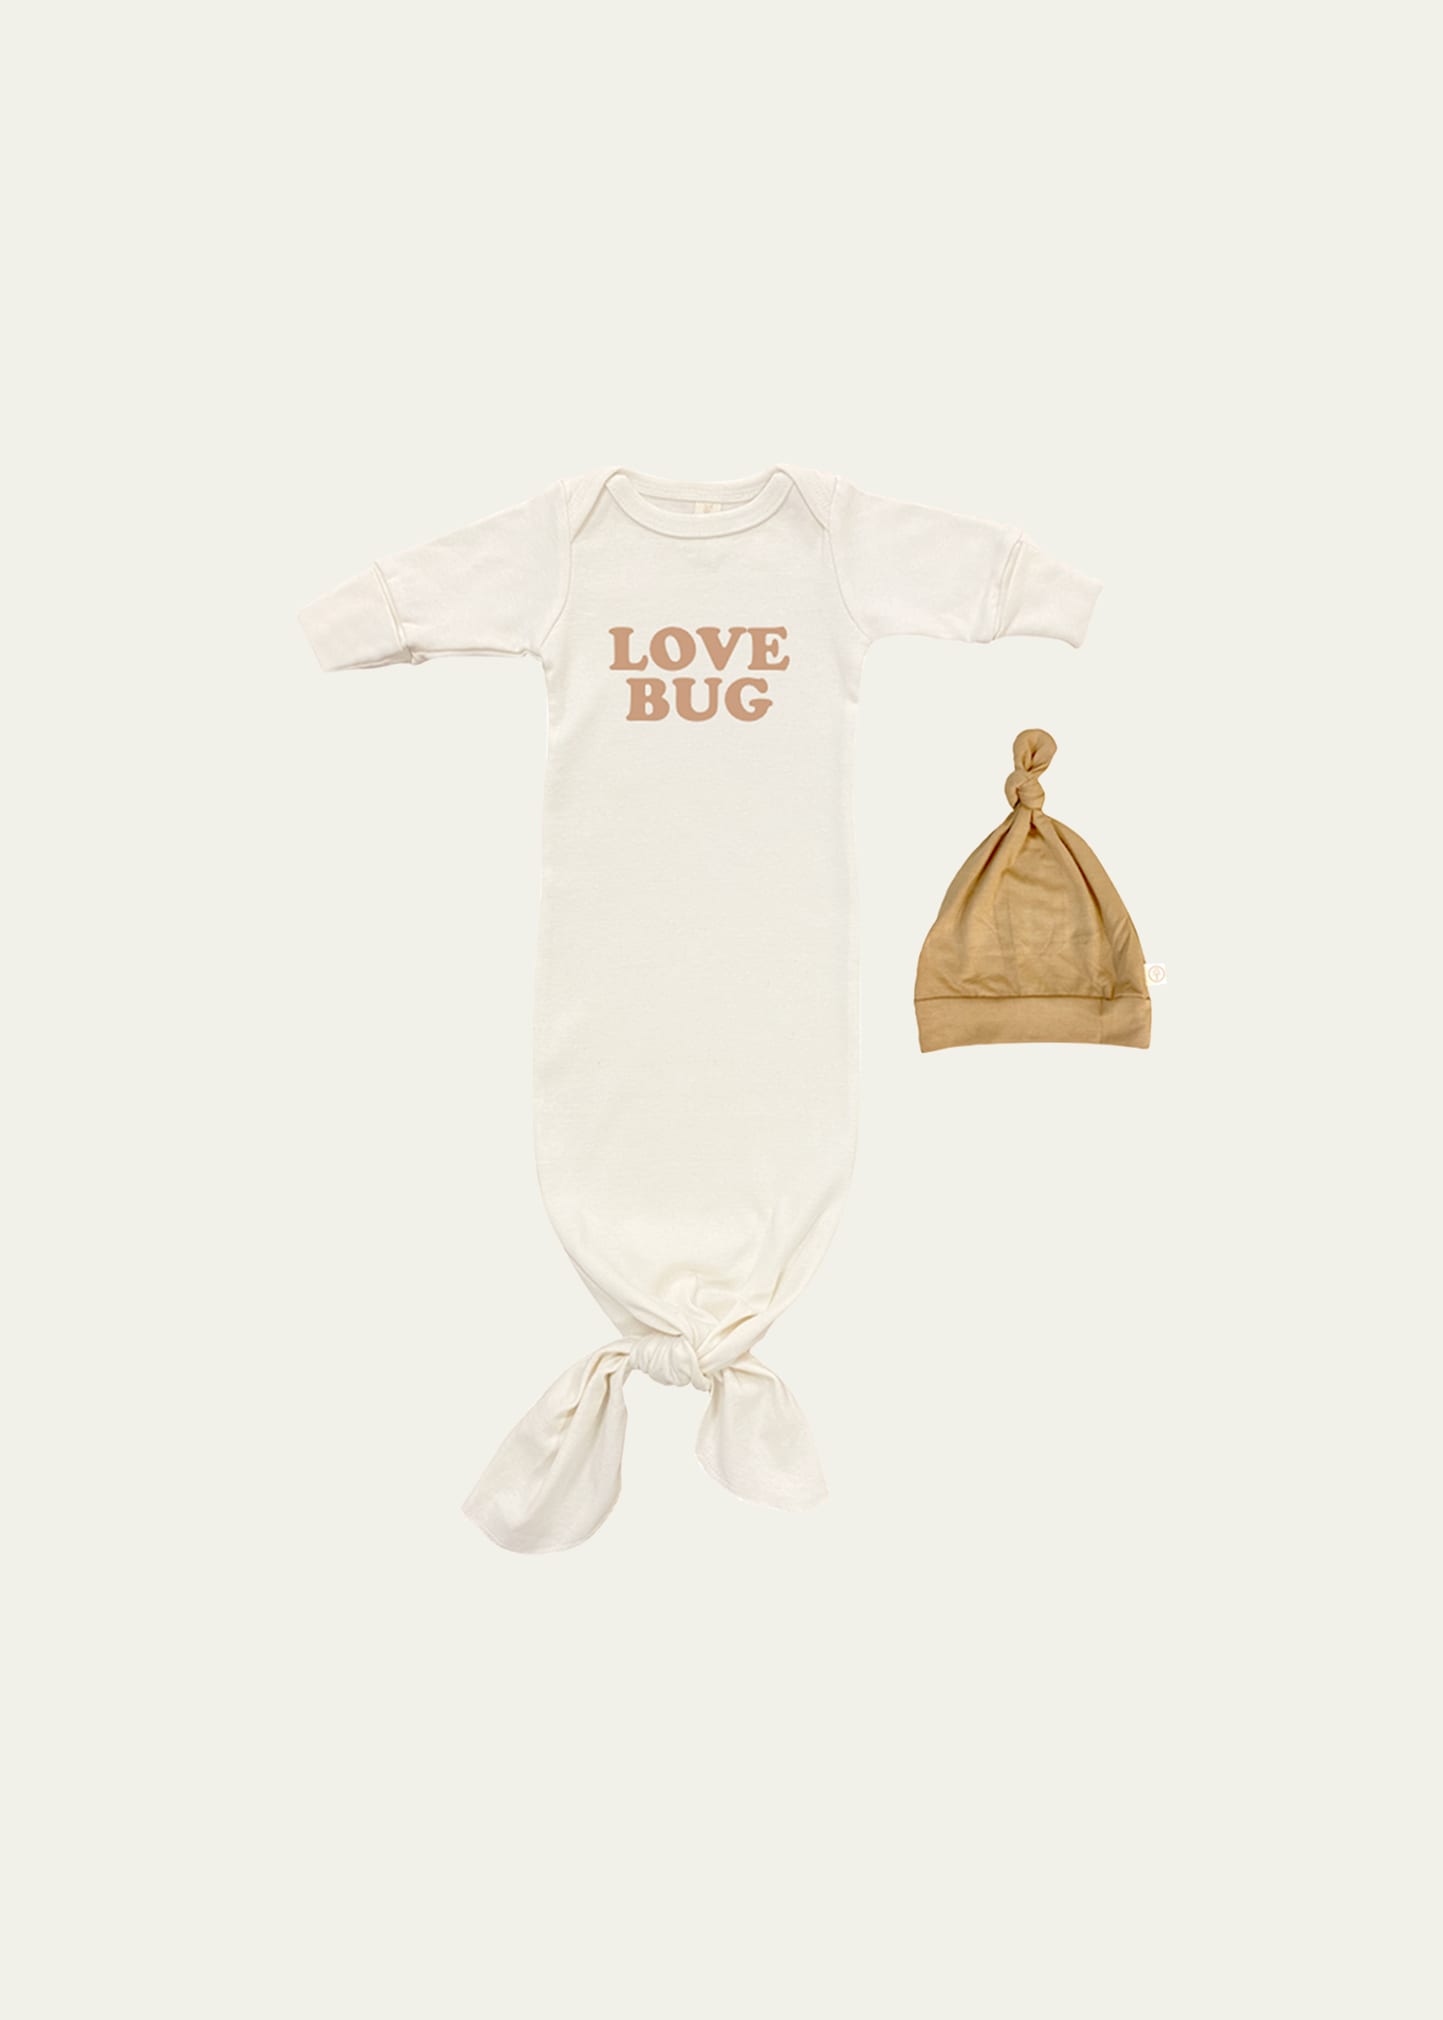 Tenth & Pine Babies' Kid's Love Bug Knotted Gown W/ Hat In Natural 5